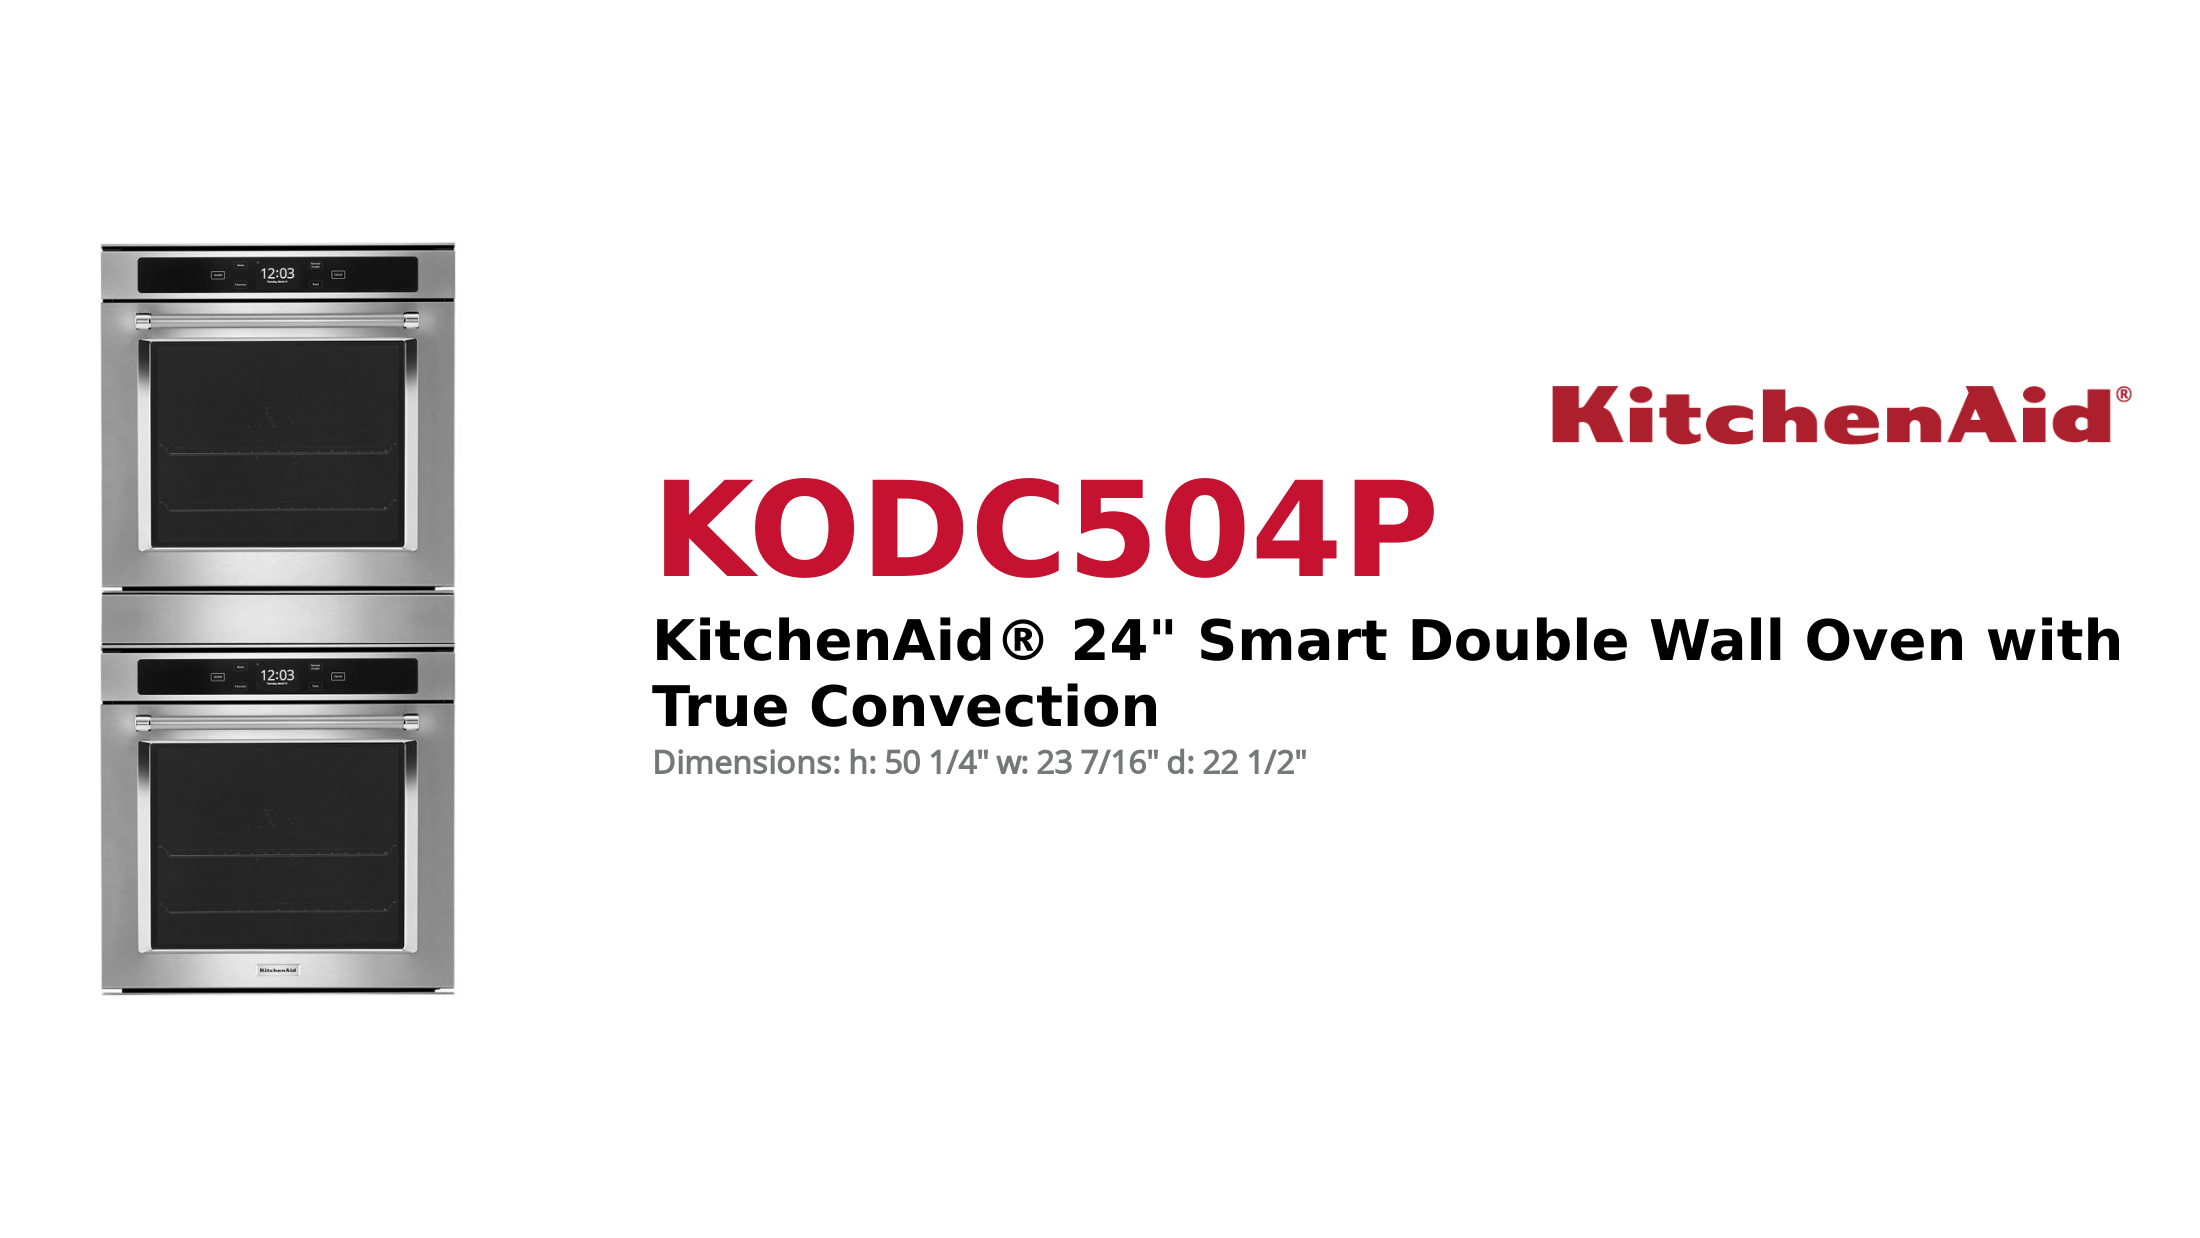 KitchenAid® 24 Smart Double Wall Oven with True Convection